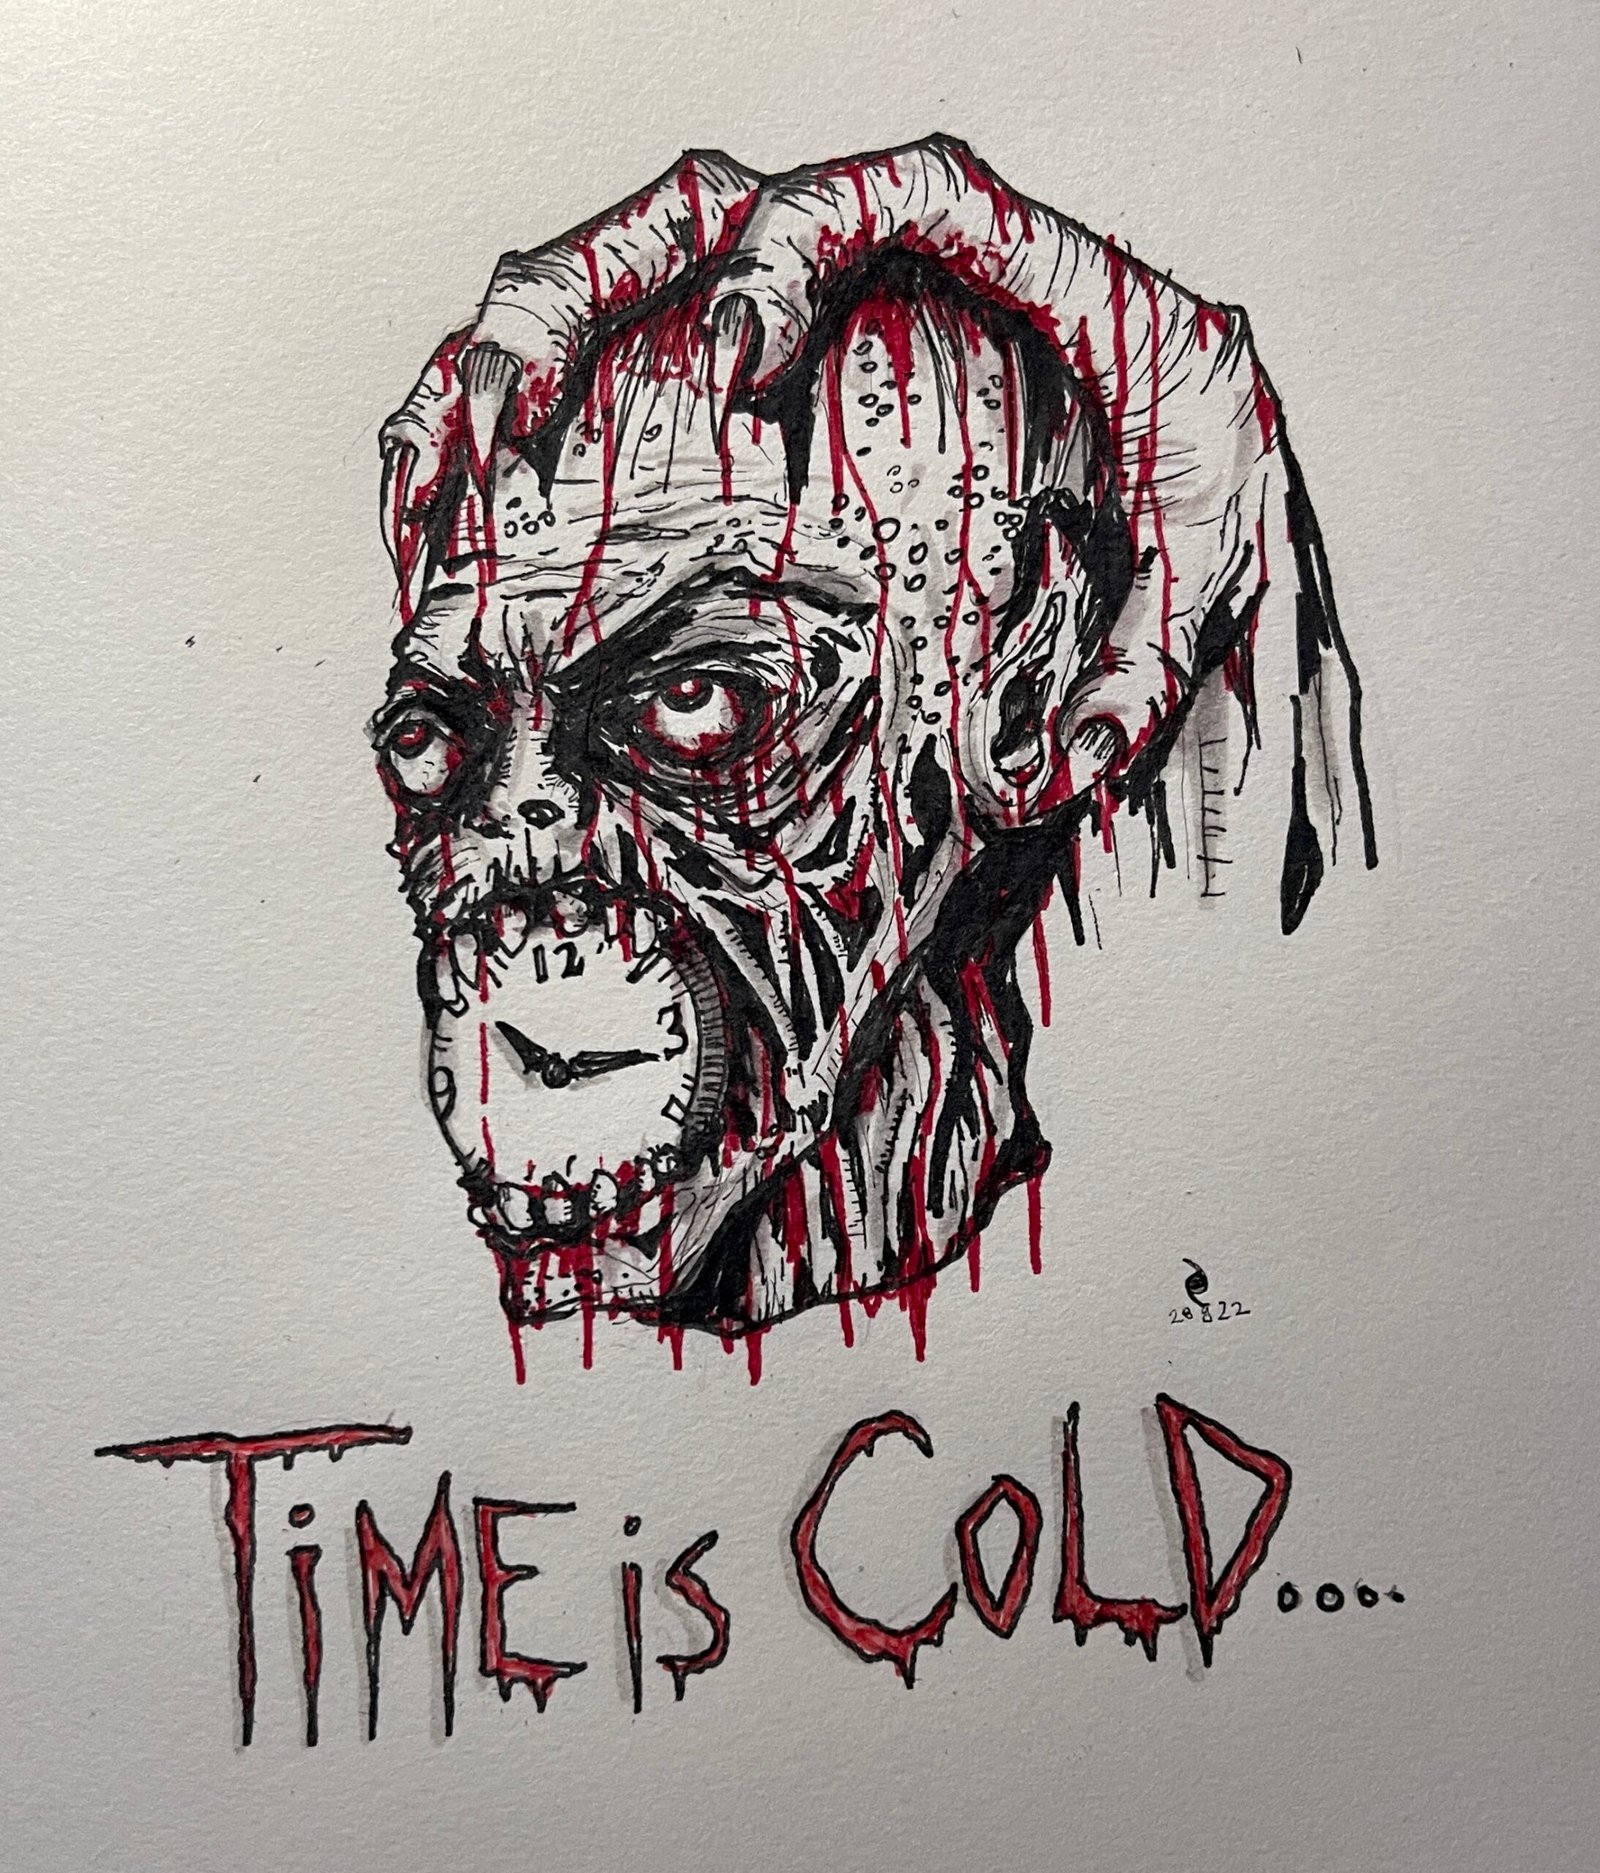 Time is Cold